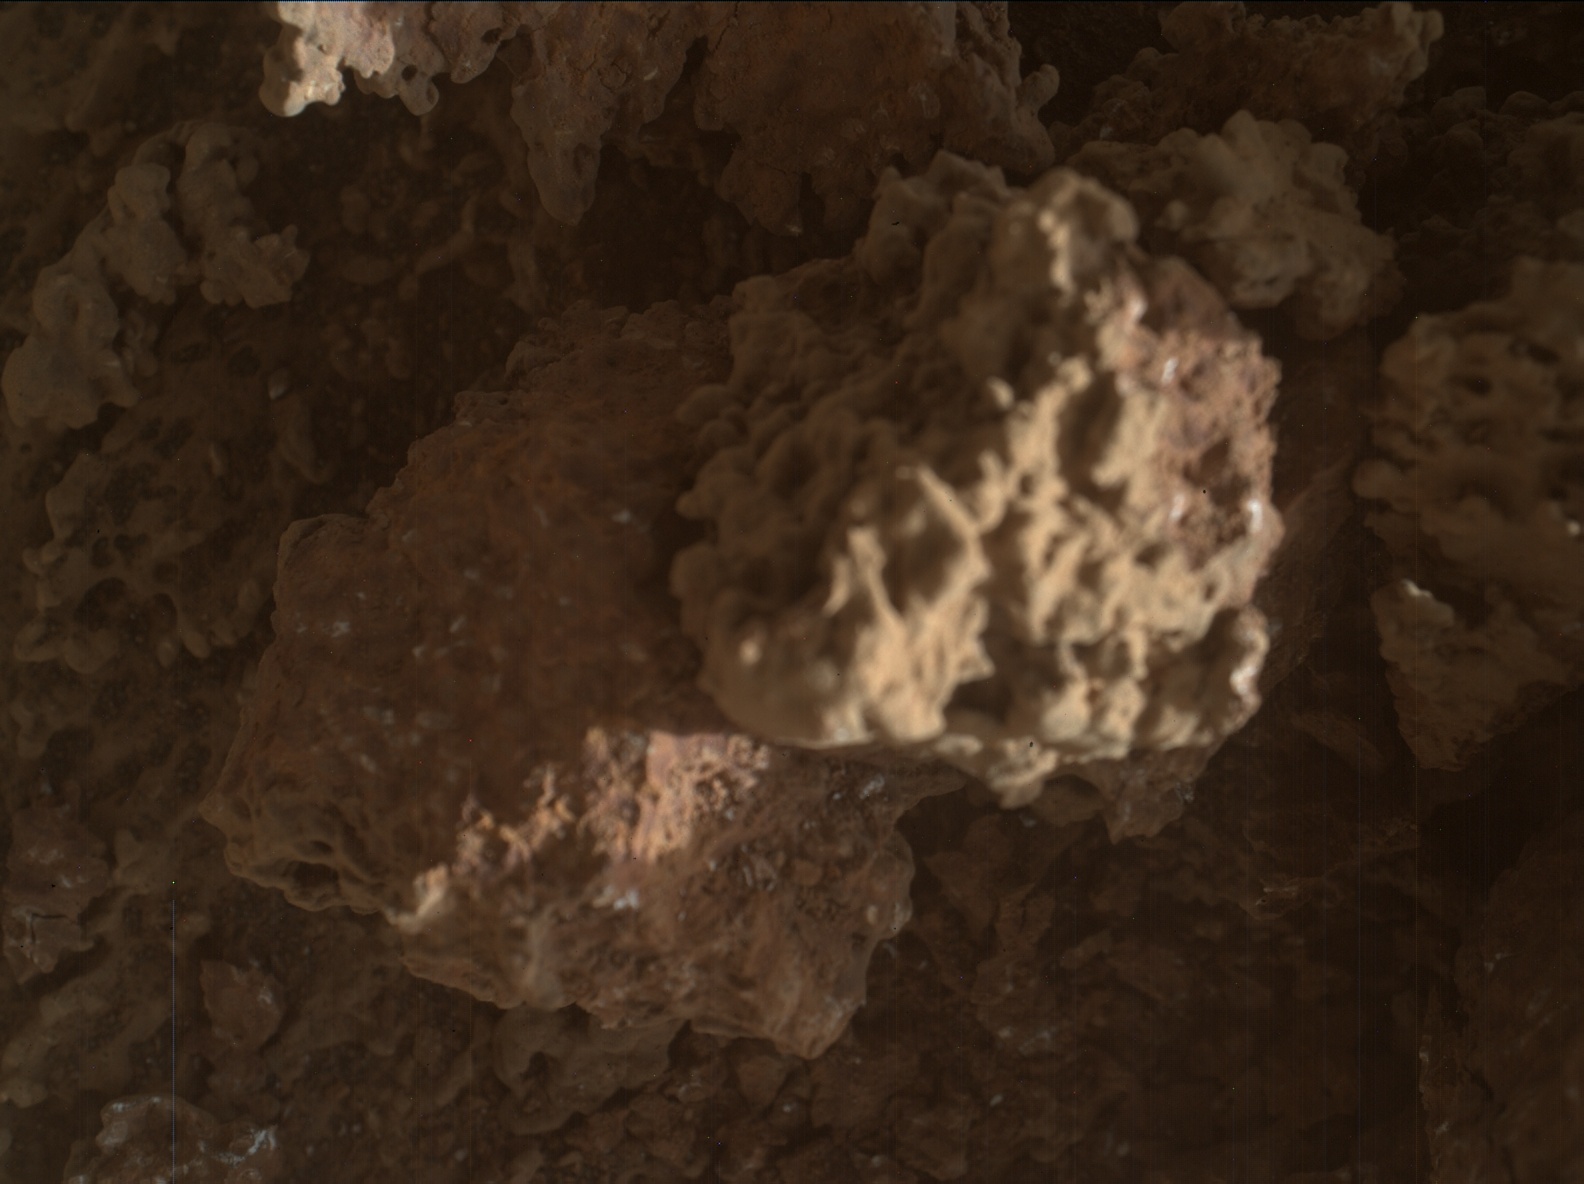 Nasa's Mars rover Curiosity acquired this image using its Mars Hand Lens Imager (MAHLI) on Sol 3272